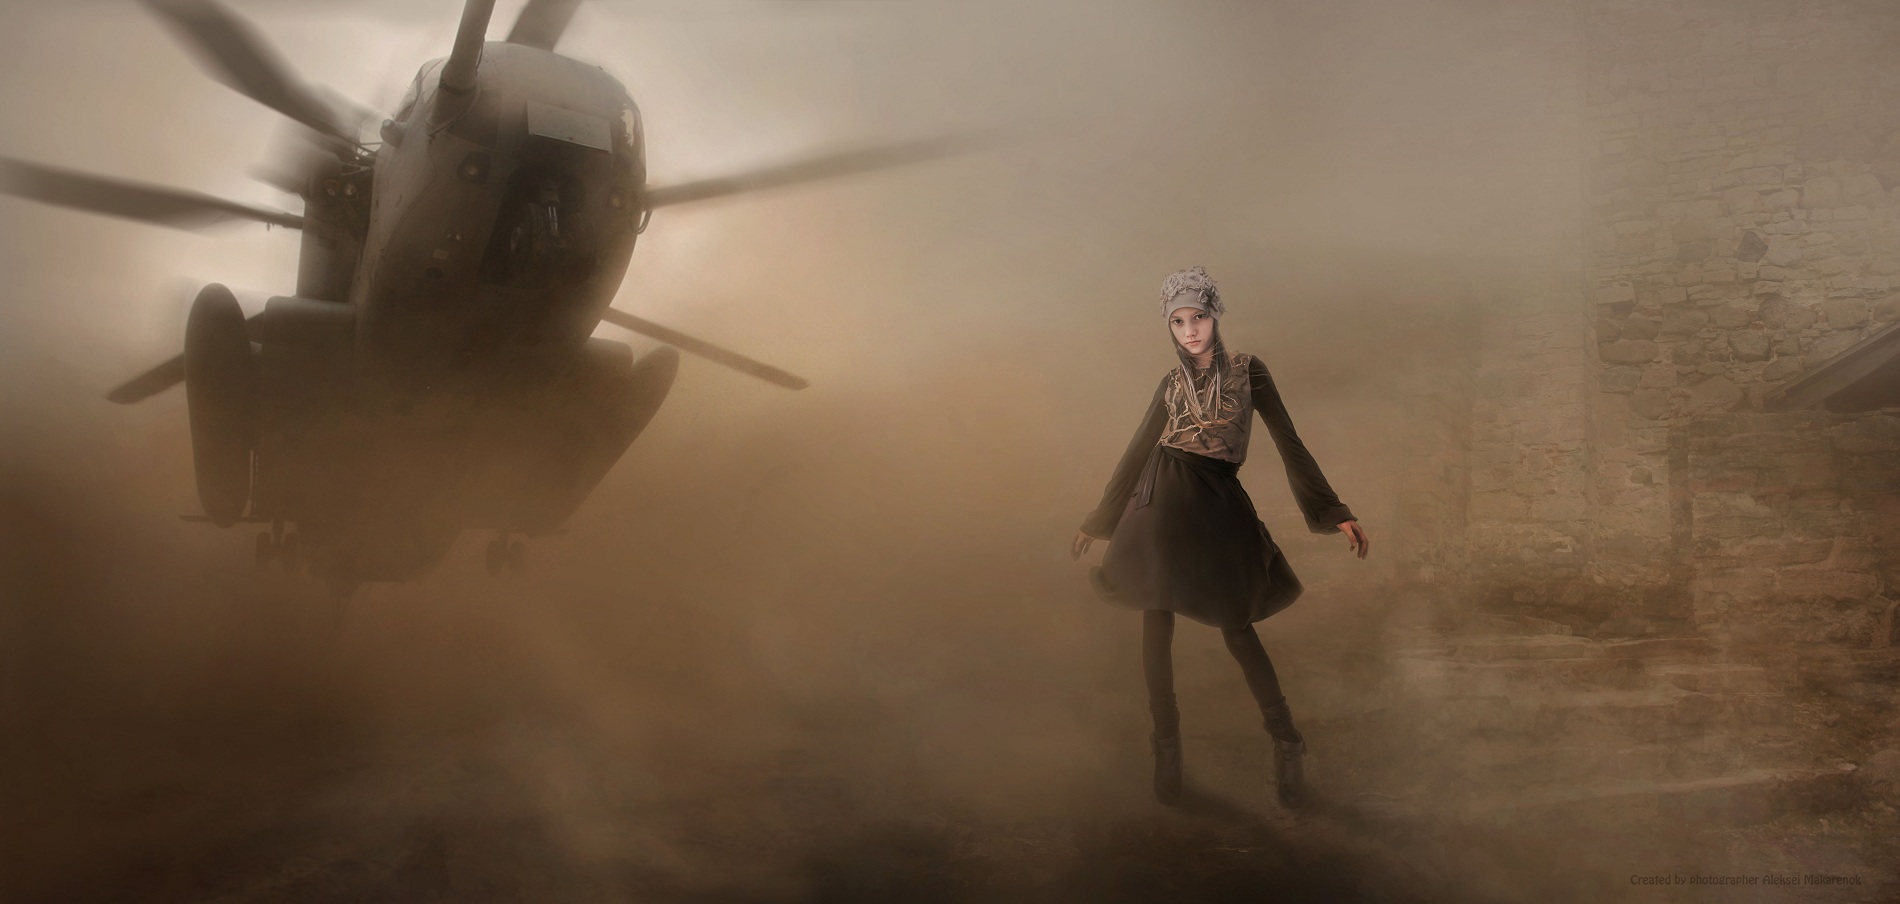 People 1900x904 women helicopters dust sand children photoshopped